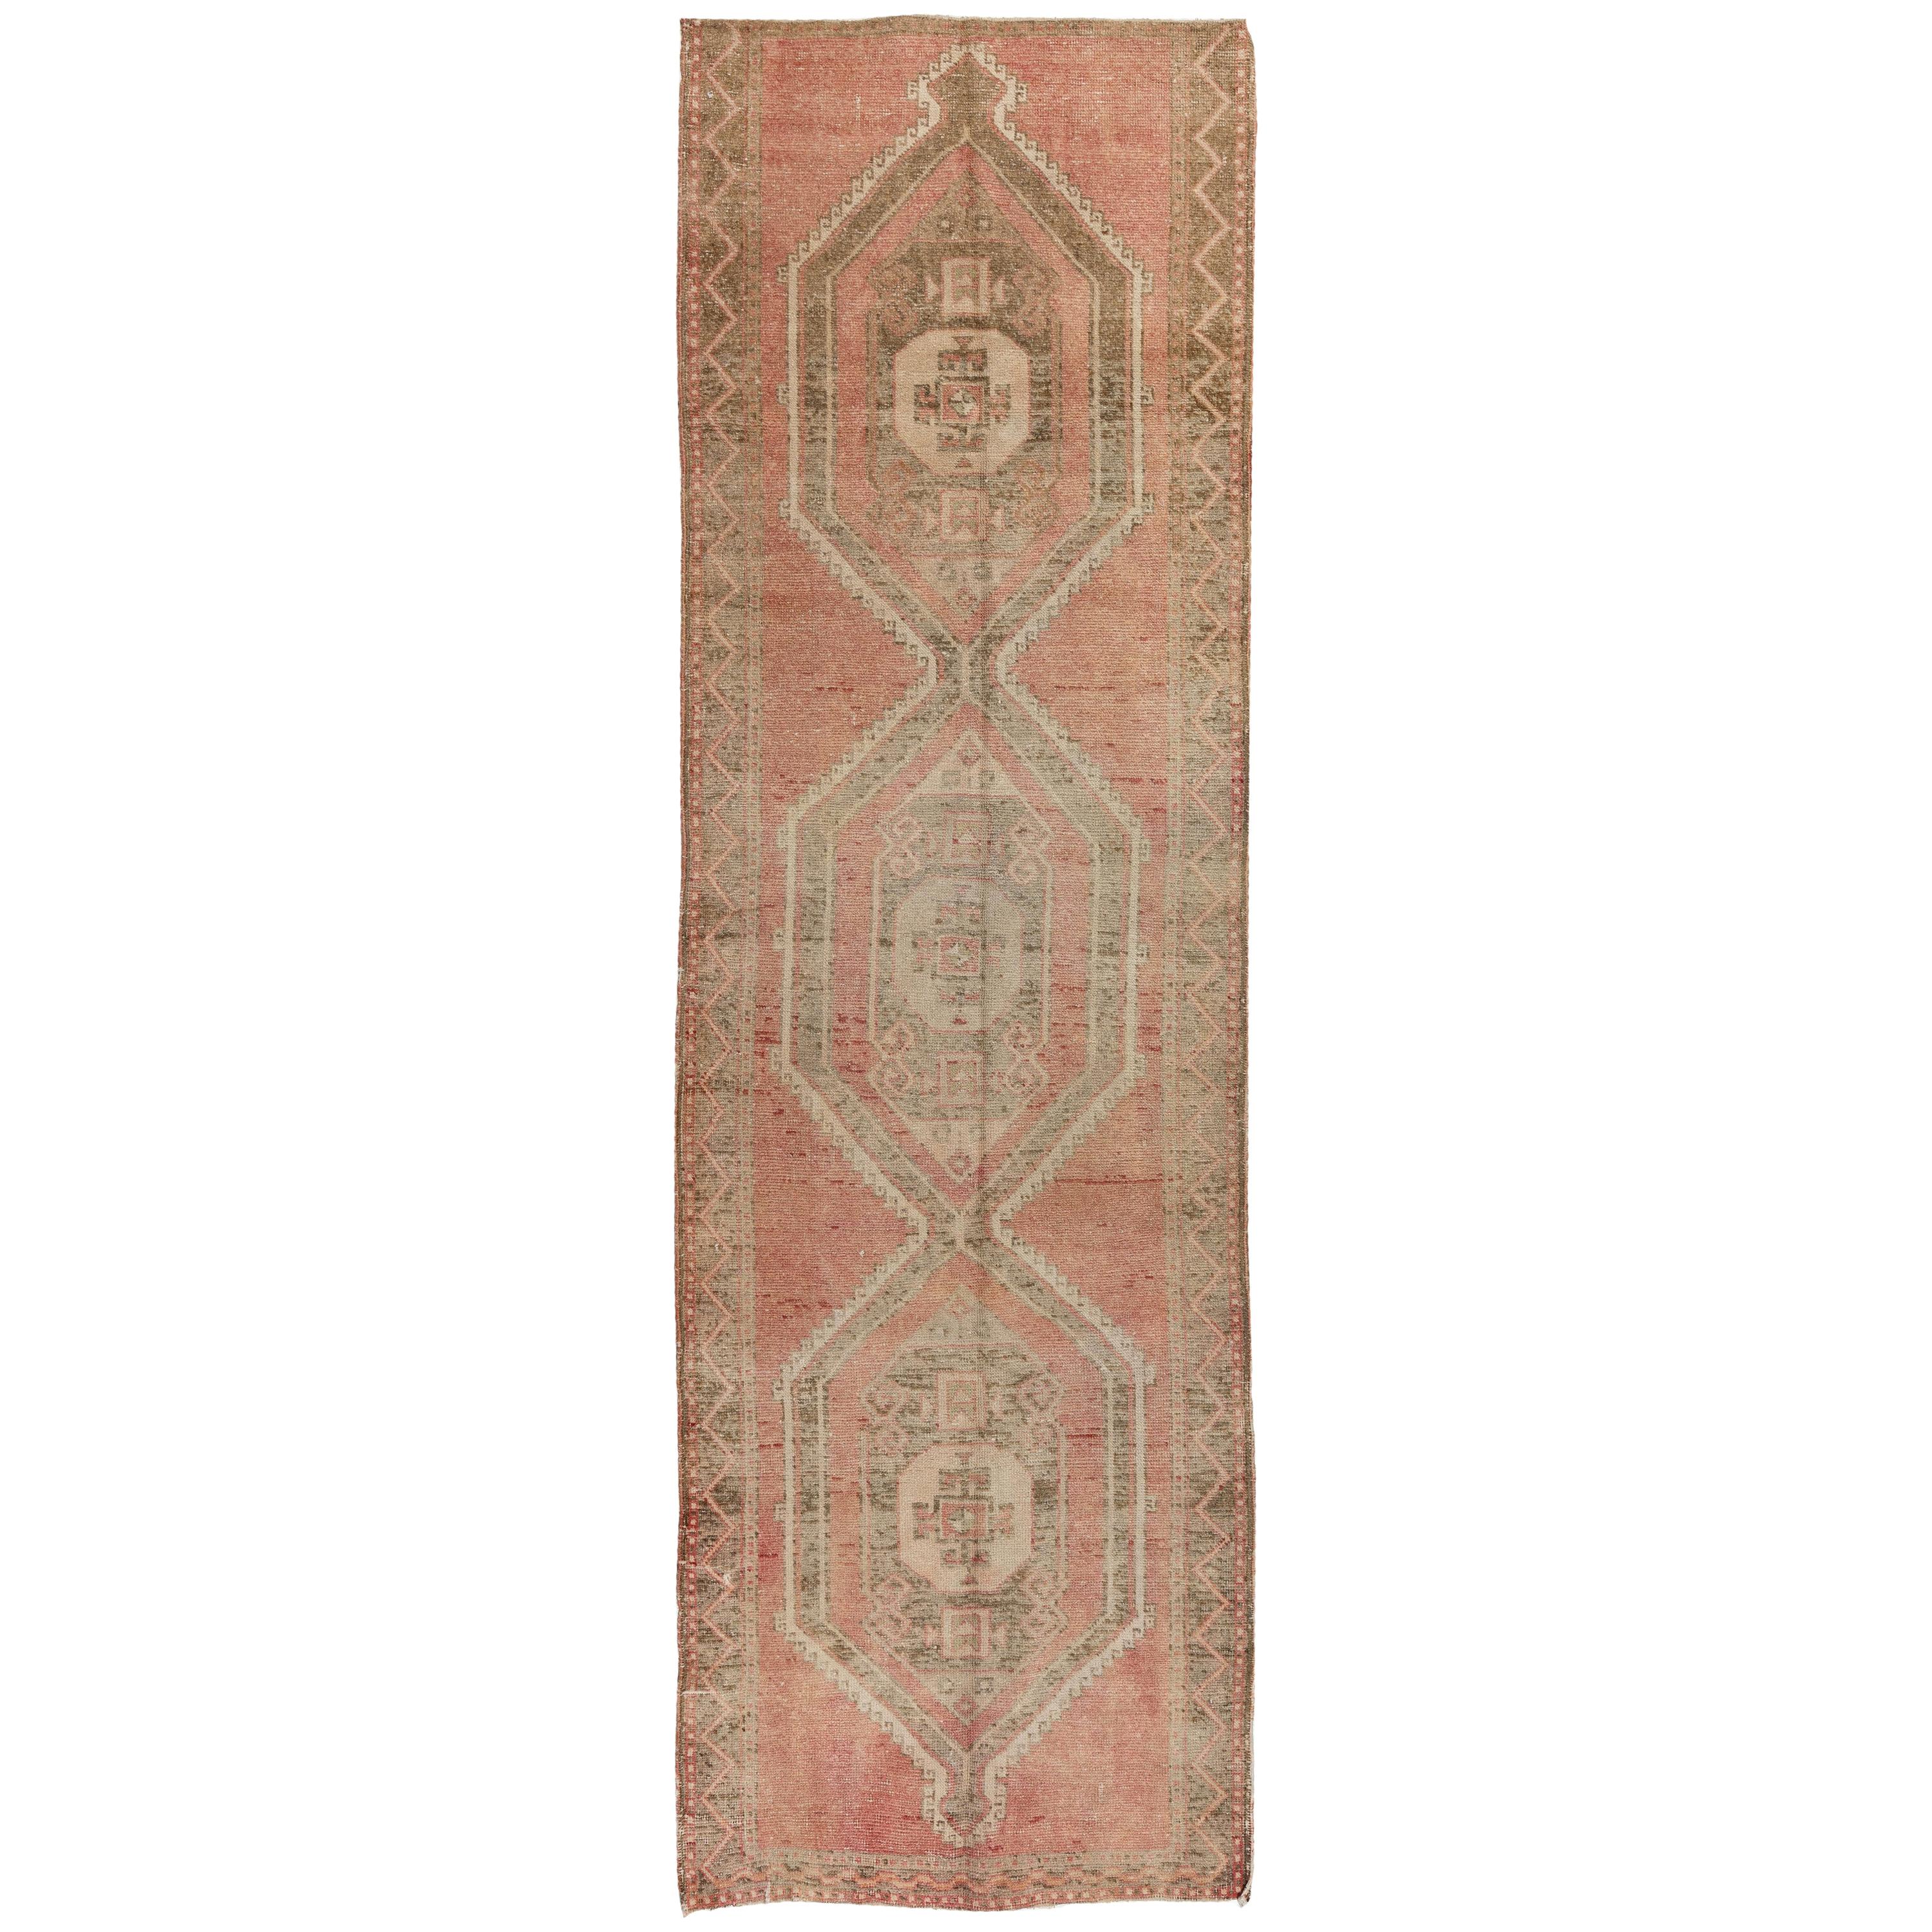 3.3x11 Ft Vintage Hand-Knotted Central Anatolian Runner, Traditional Wool Carpet For Sale